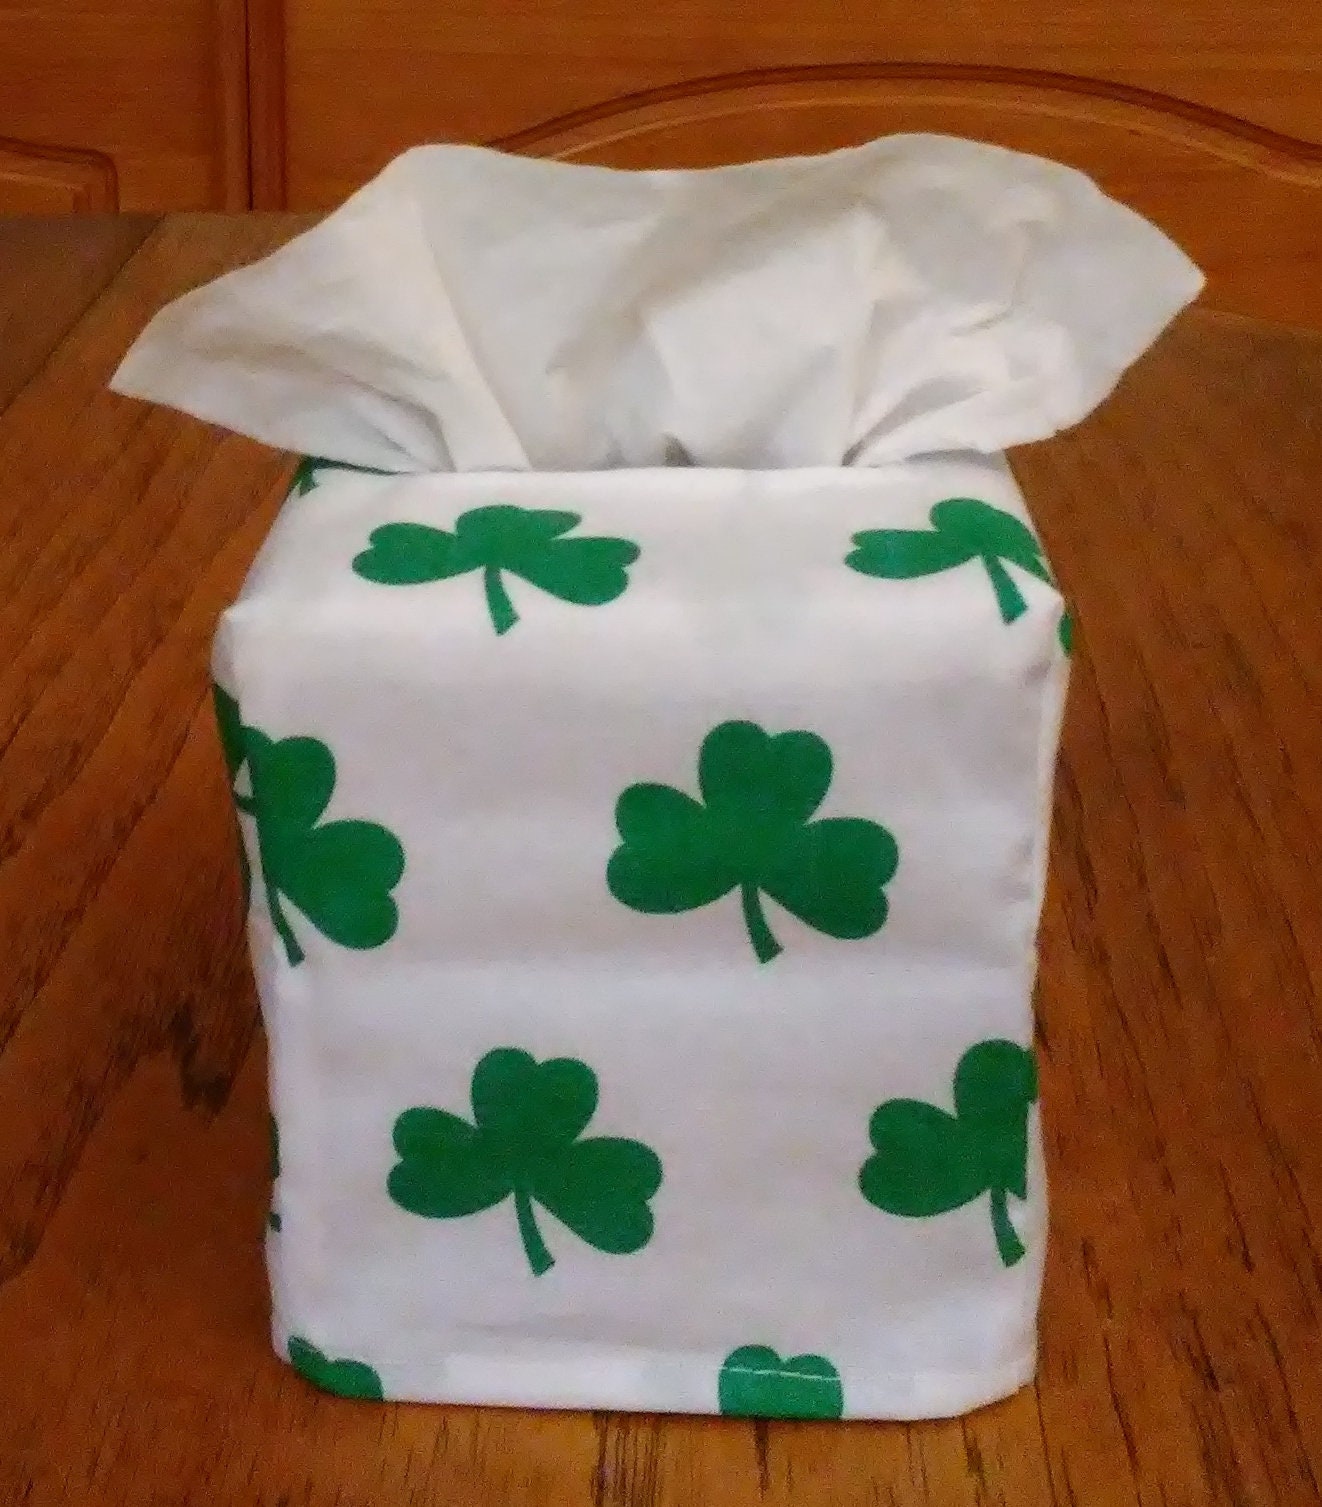 60 Sheets, Saint Patrick's Day Tissue Paper, Green Tissue Paper For Gift  Bags Gift Wrapping Tissue